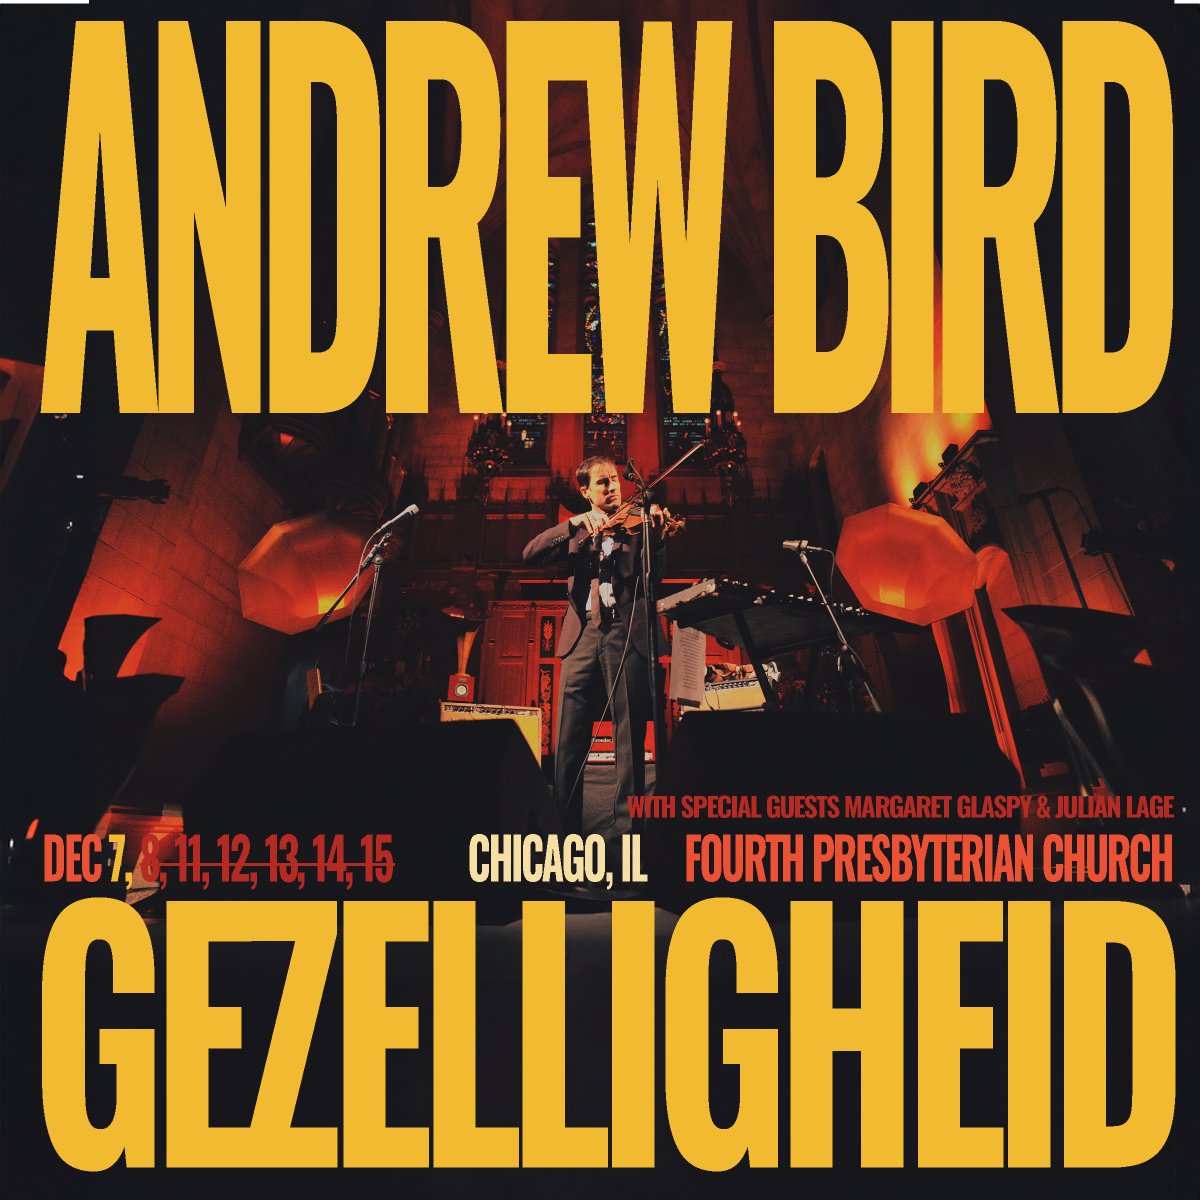 Last call for Gezelligheid tickets. Tickets are available for the 12/7 show, all other nights have sold out. Special guests Margaret Glaspy and Julian Lage join on all dates. Tickets: andrewbird.net/#tour